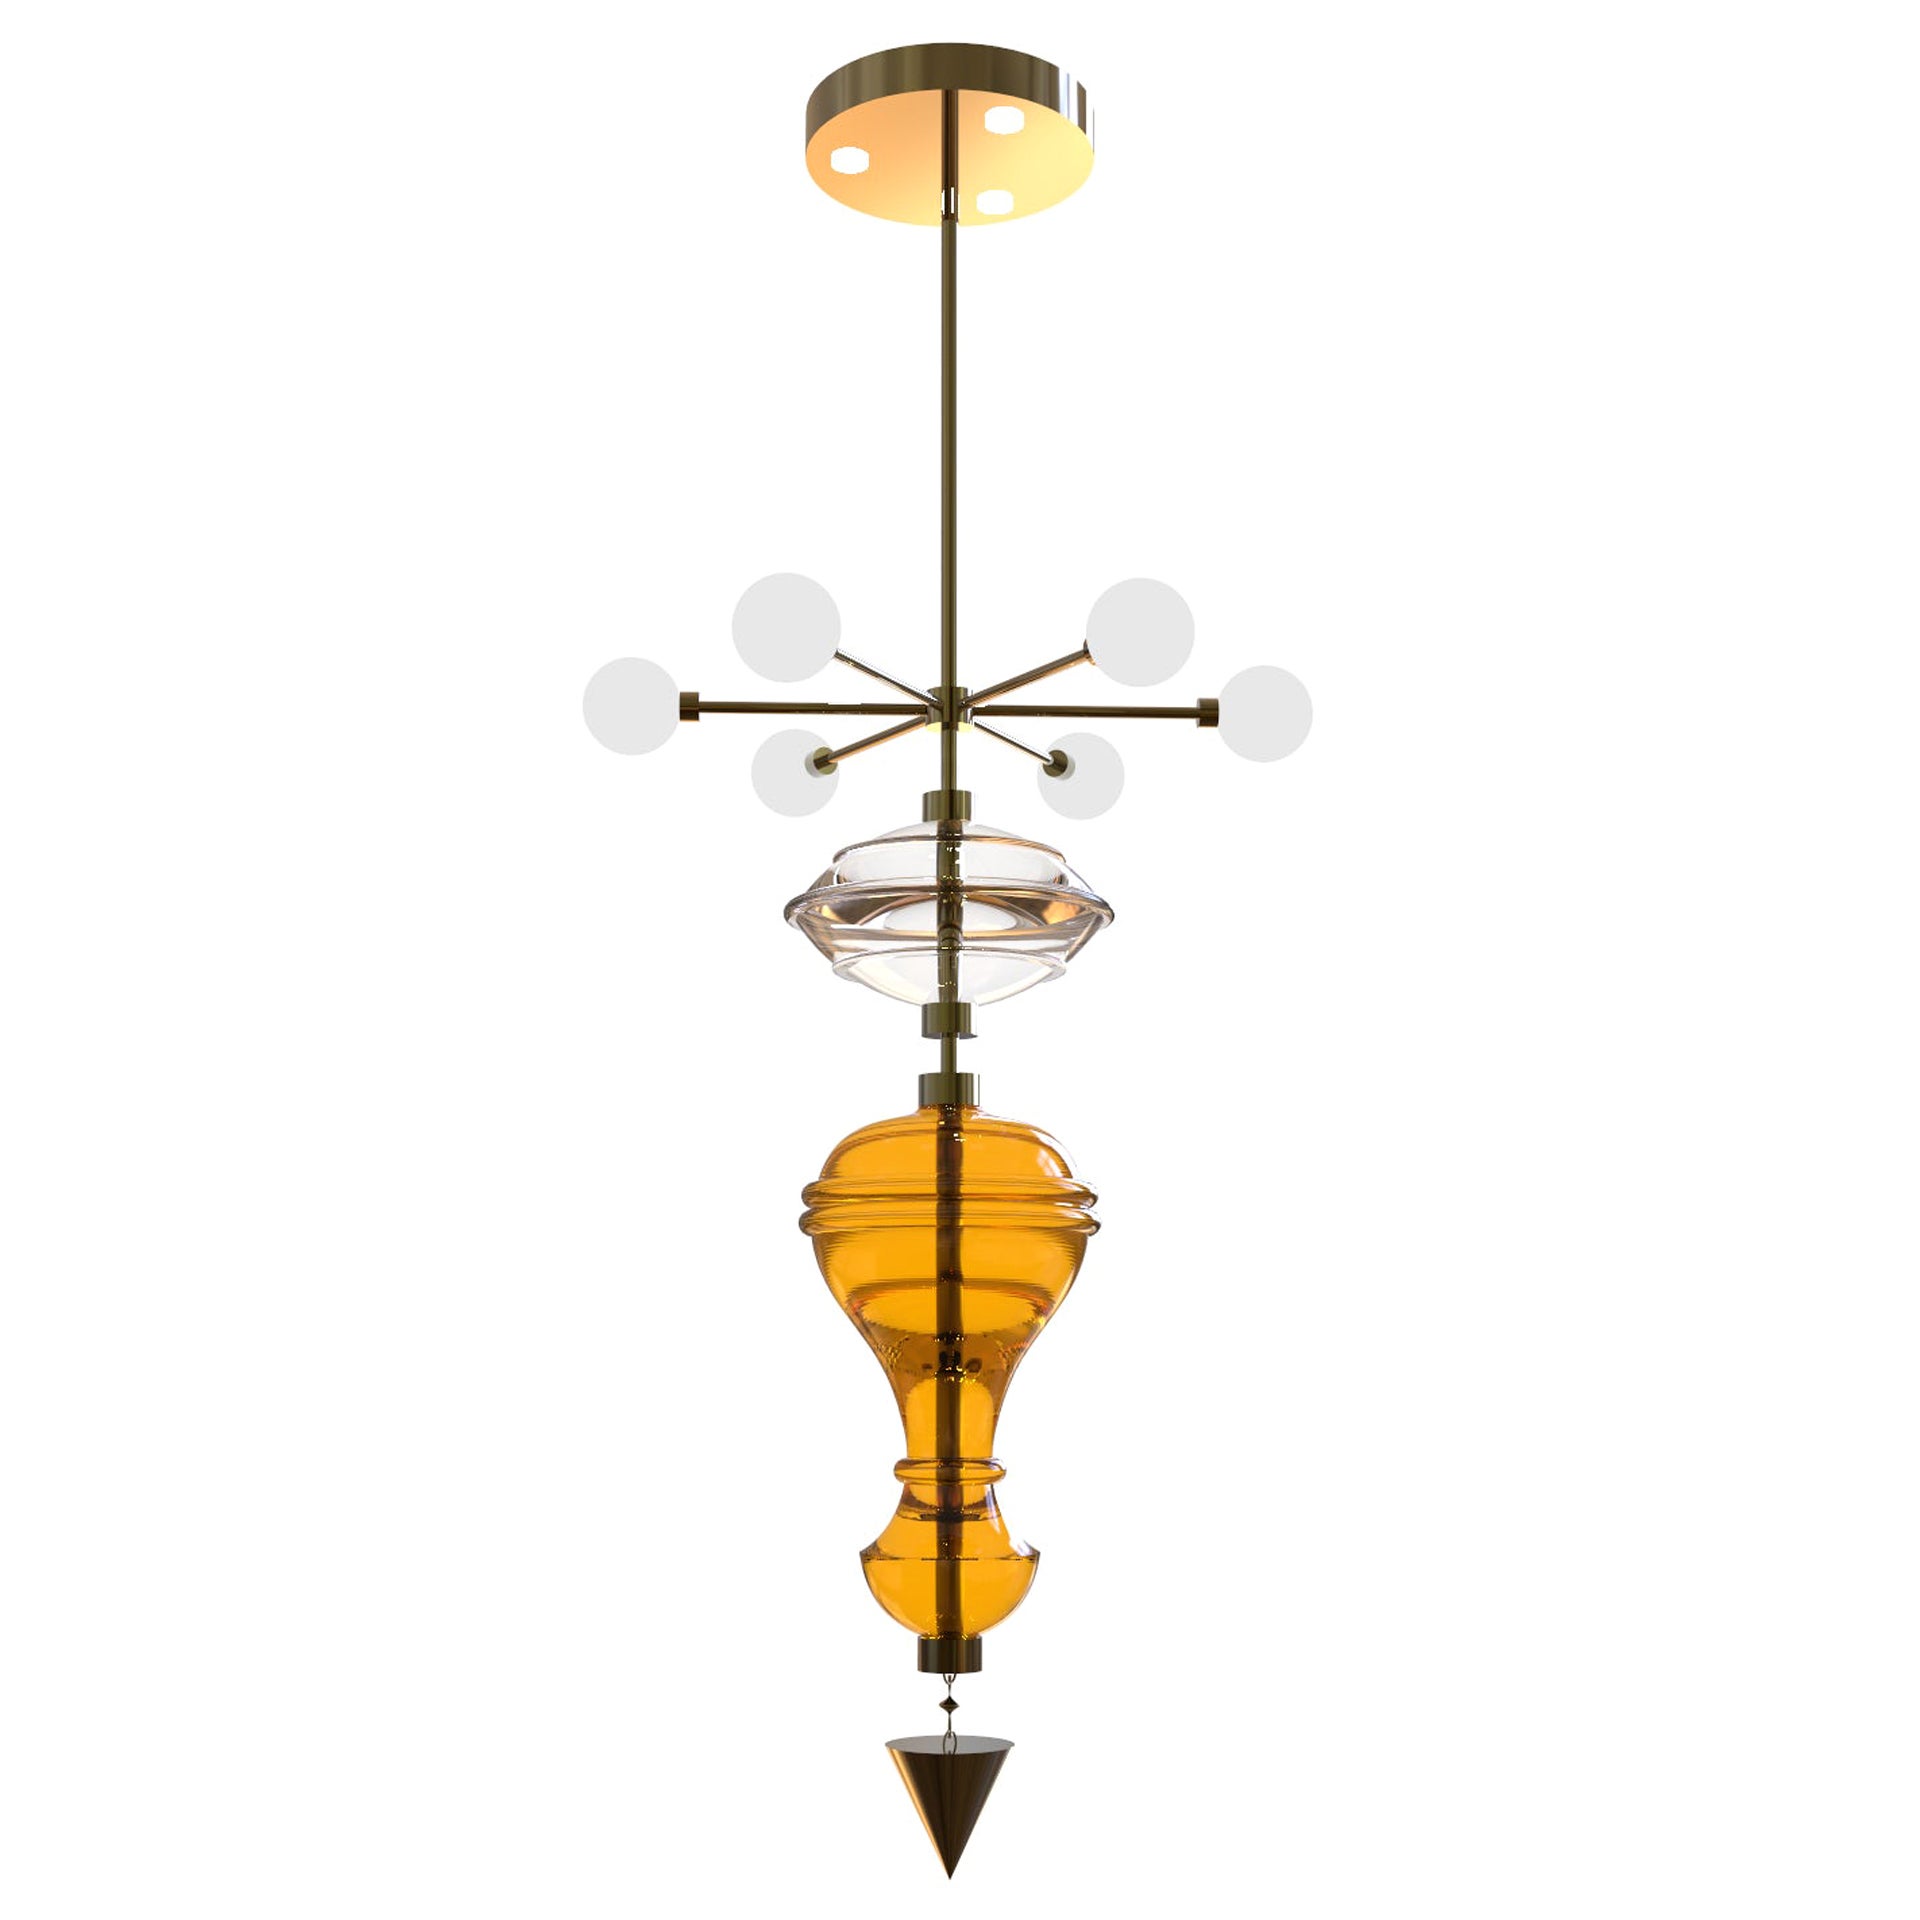 The Shikhara Hanging Pendant Light, 6 Feet Edition with Blown Glass and Brass